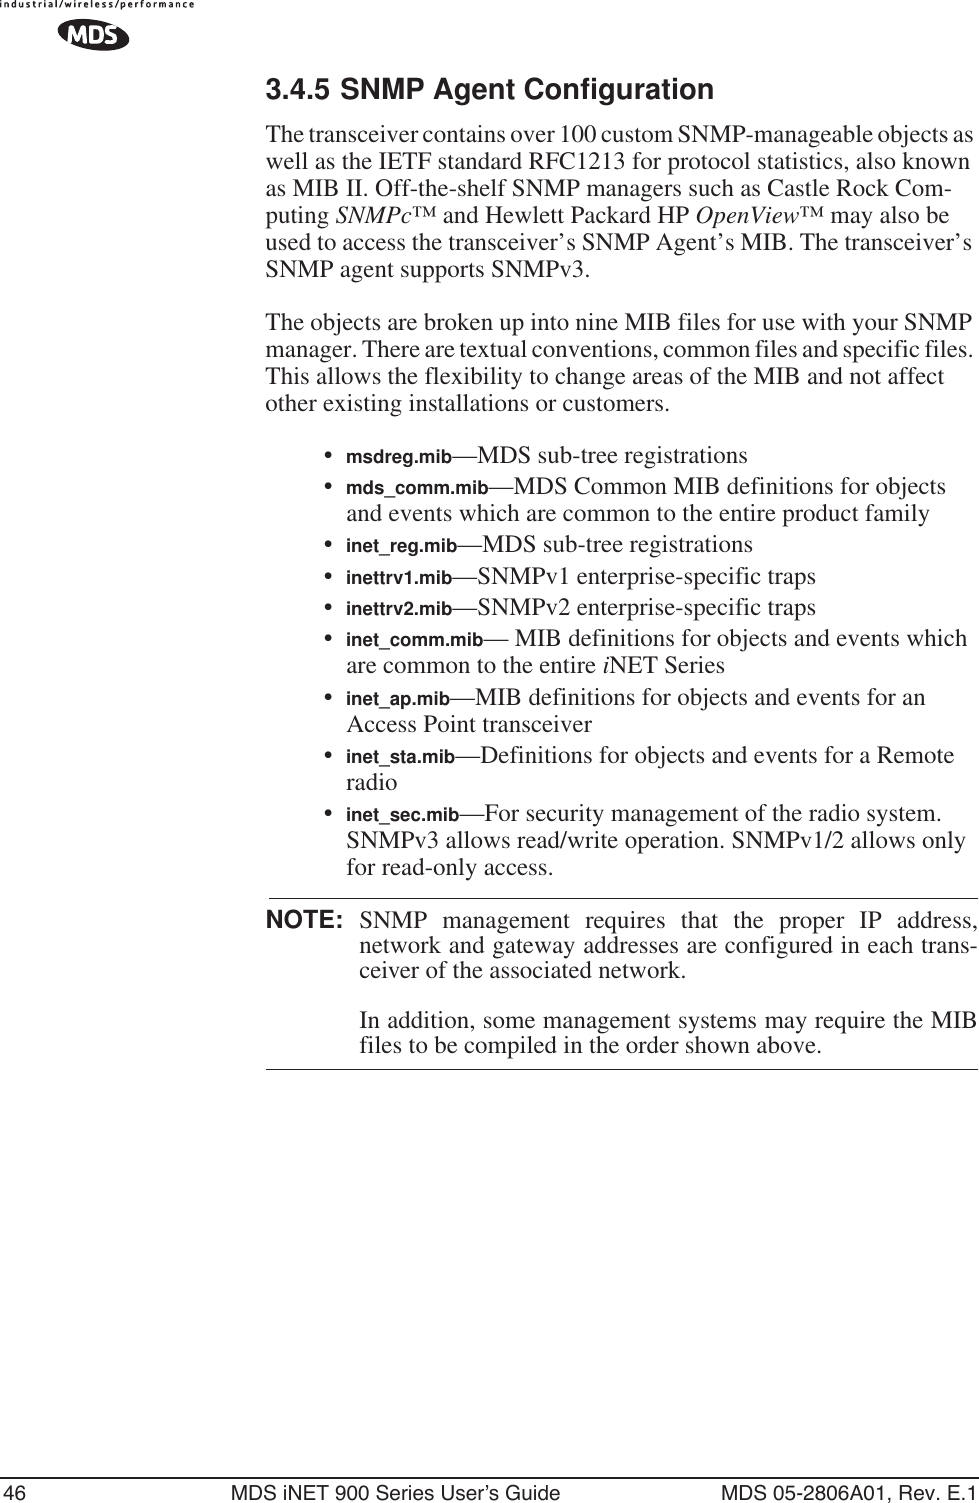 46 MDS iNET 900 Series User’s Guide MDS 05-2806A01, Rev. E.13.4.5 SNMP Agent ConfigurationThe transceiver contains over 100 custom SNMP-manageable objects as well as the IETF standard RFC1213 for protocol statistics, also known as MIB II. Off-the-shelf SNMP managers such as Castle Rock Com-puting SNMPc™ and Hewlett Packard HP OpenView™ may also be used to access the transceiver’s SNMP Agent’s MIB. The transceiver’s SNMP agent supports SNMPv3.The objects are broken up into nine MIB files for use with your SNMP manager. There are textual conventions, common files and specific files. This allows the flexibility to change areas of the MIB and not affect other existing installations or customers.•msdreg.mib—MDS sub-tree registrations•mds_comm.mib—MDS Common MIB definitions for objects and events which are common to the entire product family•inet_reg.mib—MDS sub-tree registrations•inettrv1.mib—SNMPv1 enterprise-specific traps•inettrv2.mib—SNMPv2 enterprise-specific traps•inet_comm.mib— MIB definitions for objects and events which are common to the entire iNET Series•inet_ap.mib—MIB definitions for objects and events for an Access Point transceiver•inet_sta.mib—Definitions for objects and events for a Remote radio•inet_sec.mib—For security management of the radio system. SNMPv3 allows read/write operation. SNMPv1/2 allows only for read-only access.NOTE: SNMP management requires that the proper IP address,network and gateway addresses are configured in each trans-ceiver of the associated network. In addition, some management systems may require the MIBfiles to be compiled in the order shown above.